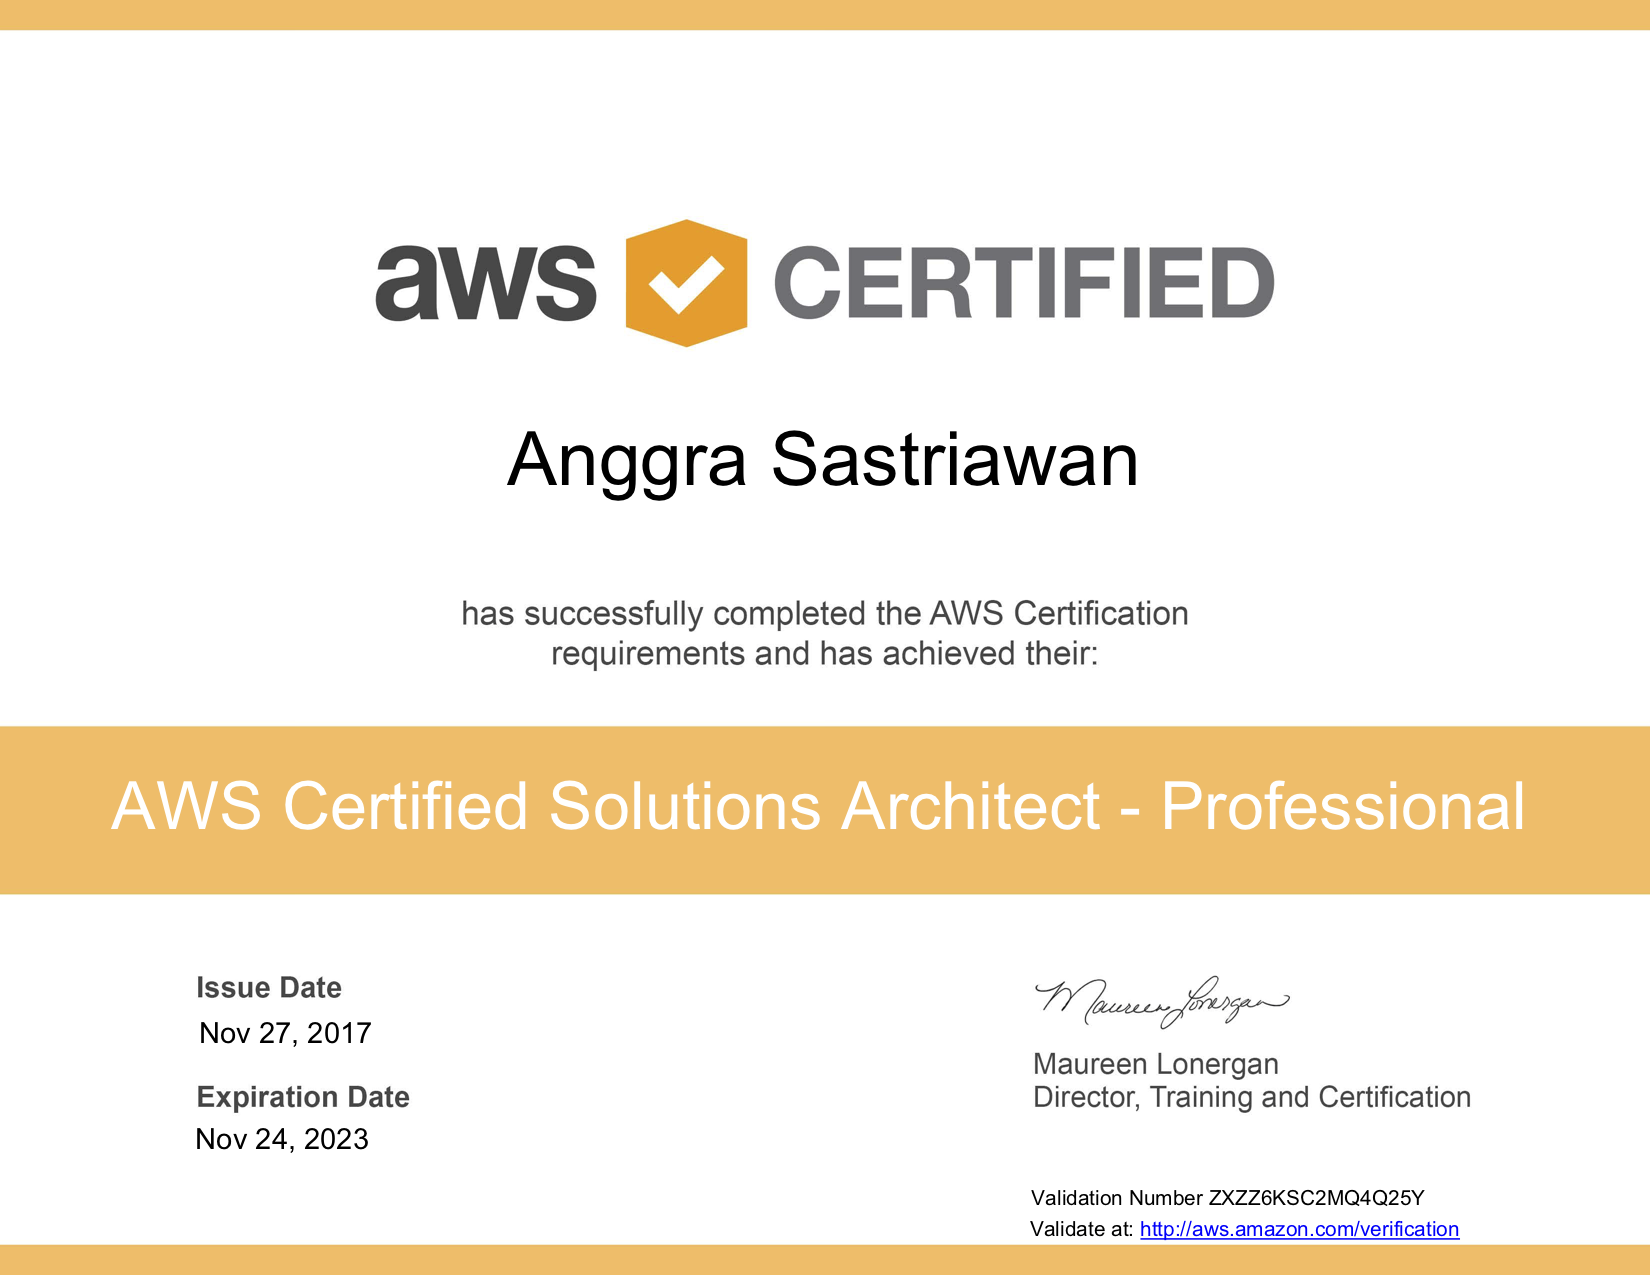 Anggra's AWS Certified Solutions Architect - Professional certificate